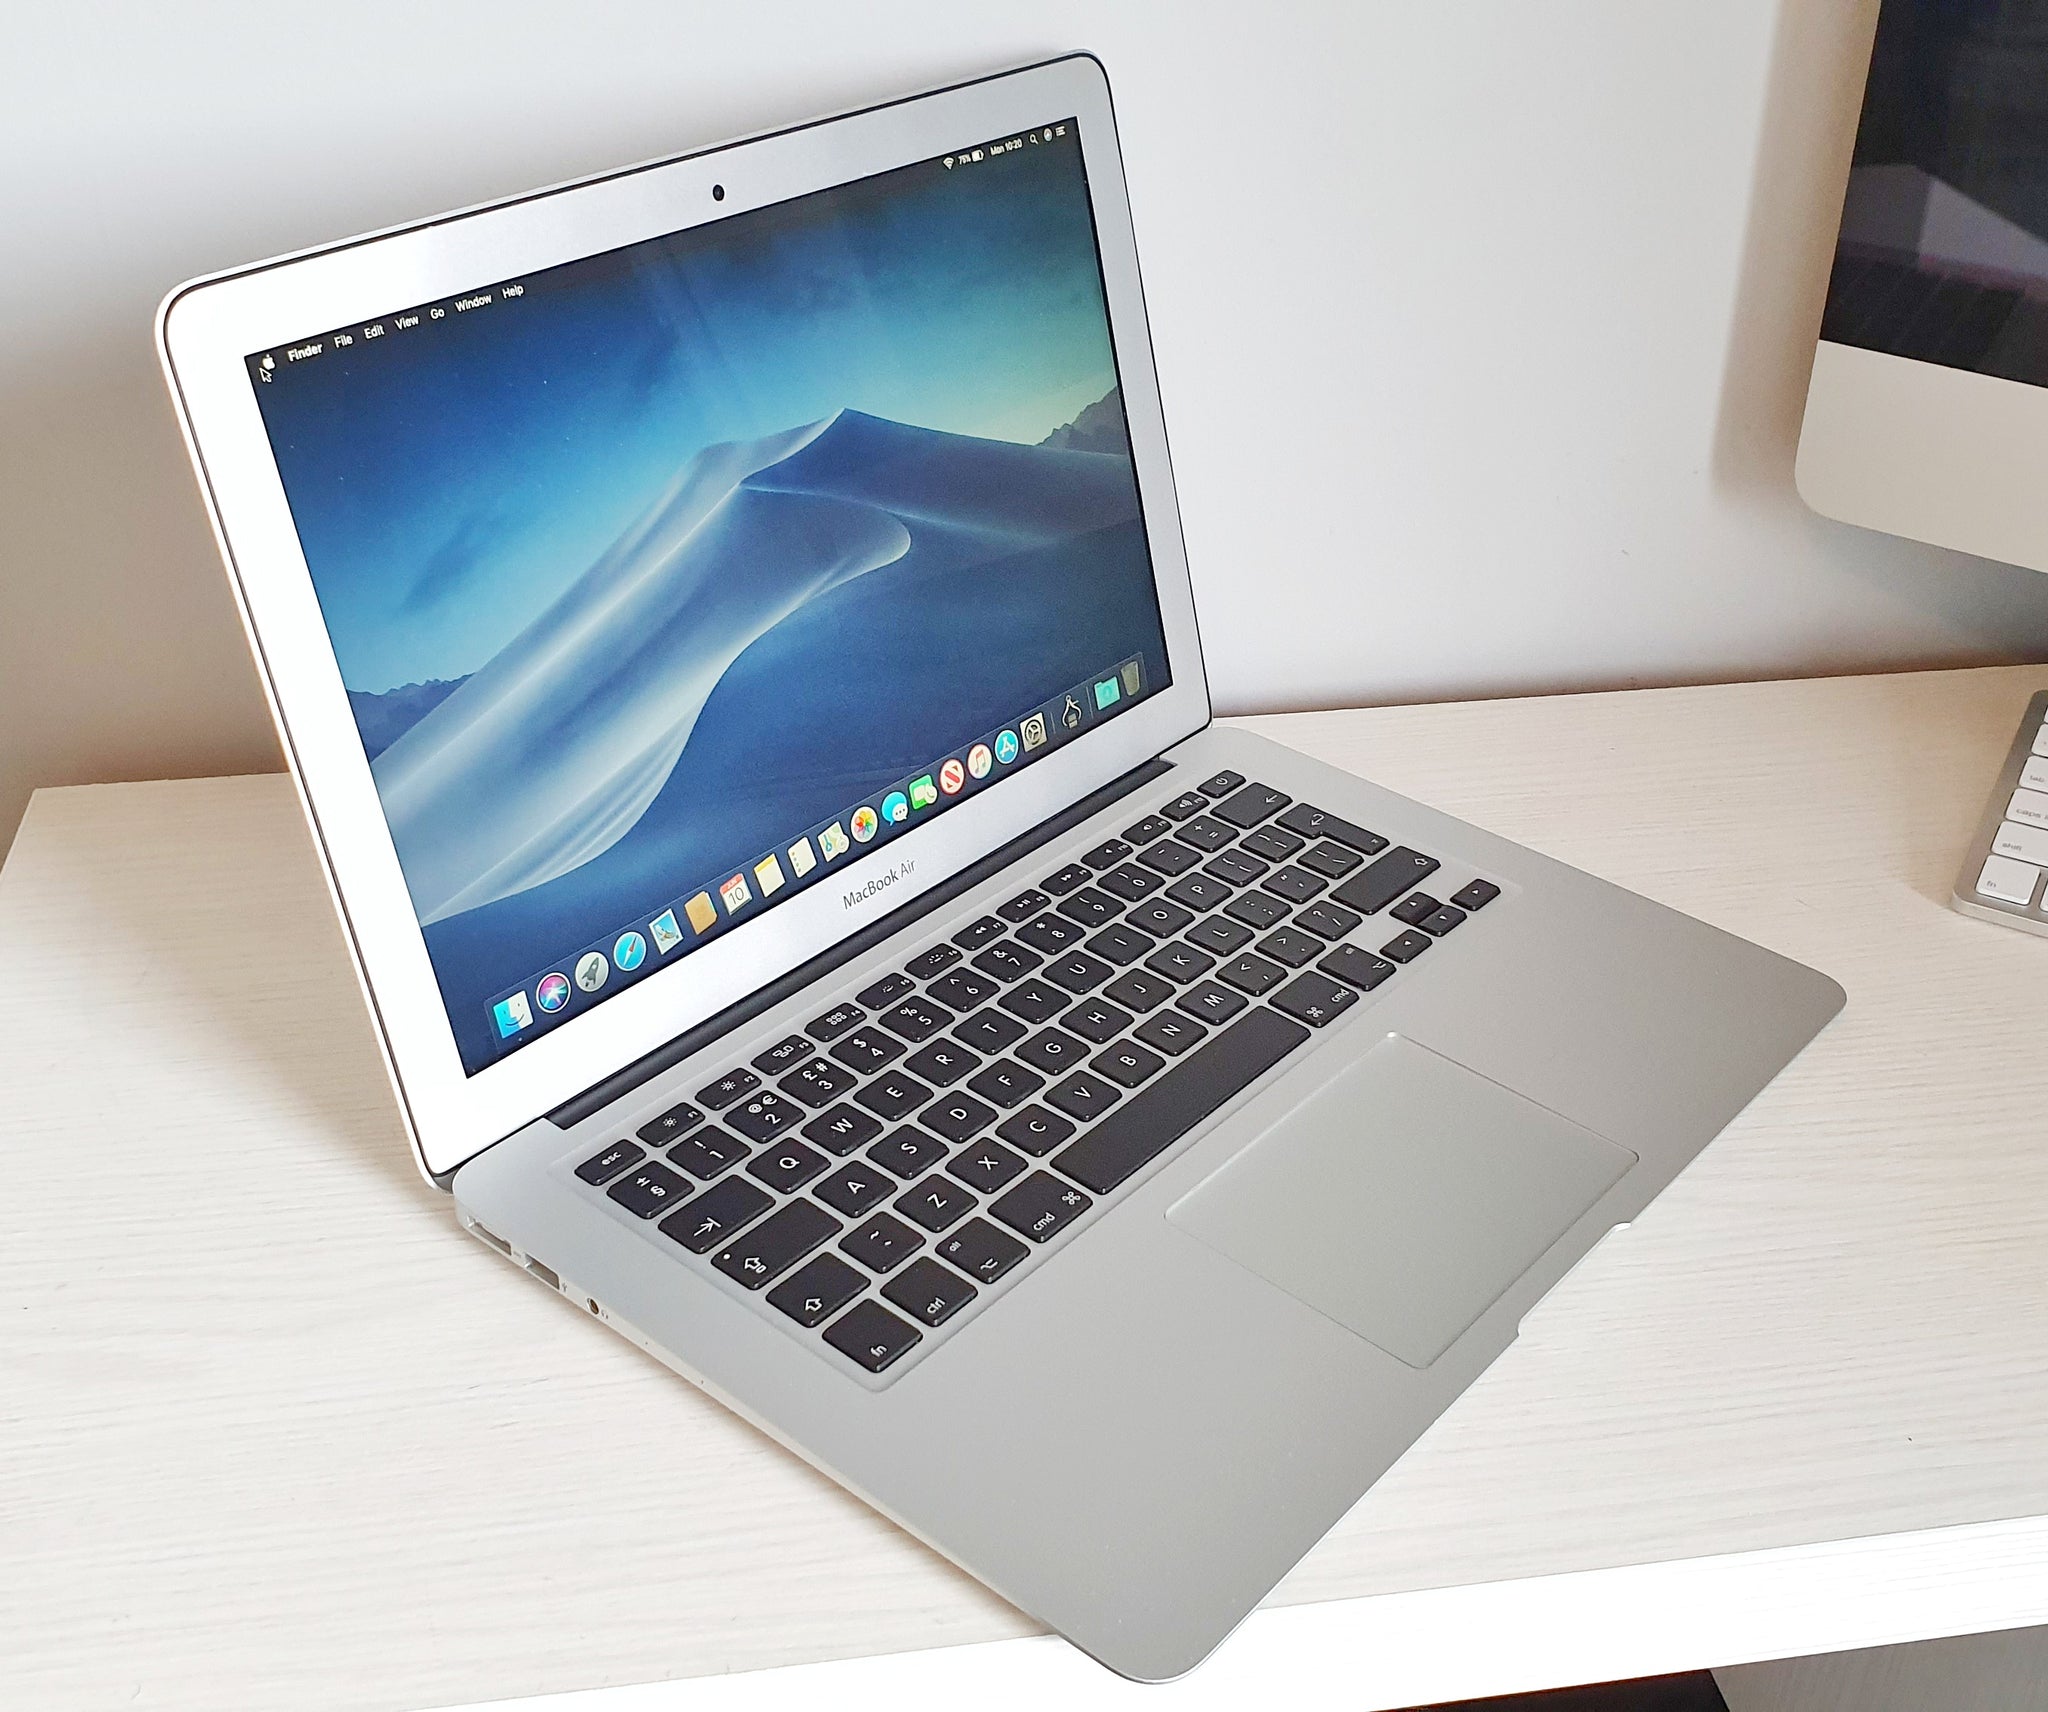 what is the latest os for macbook air model a1465